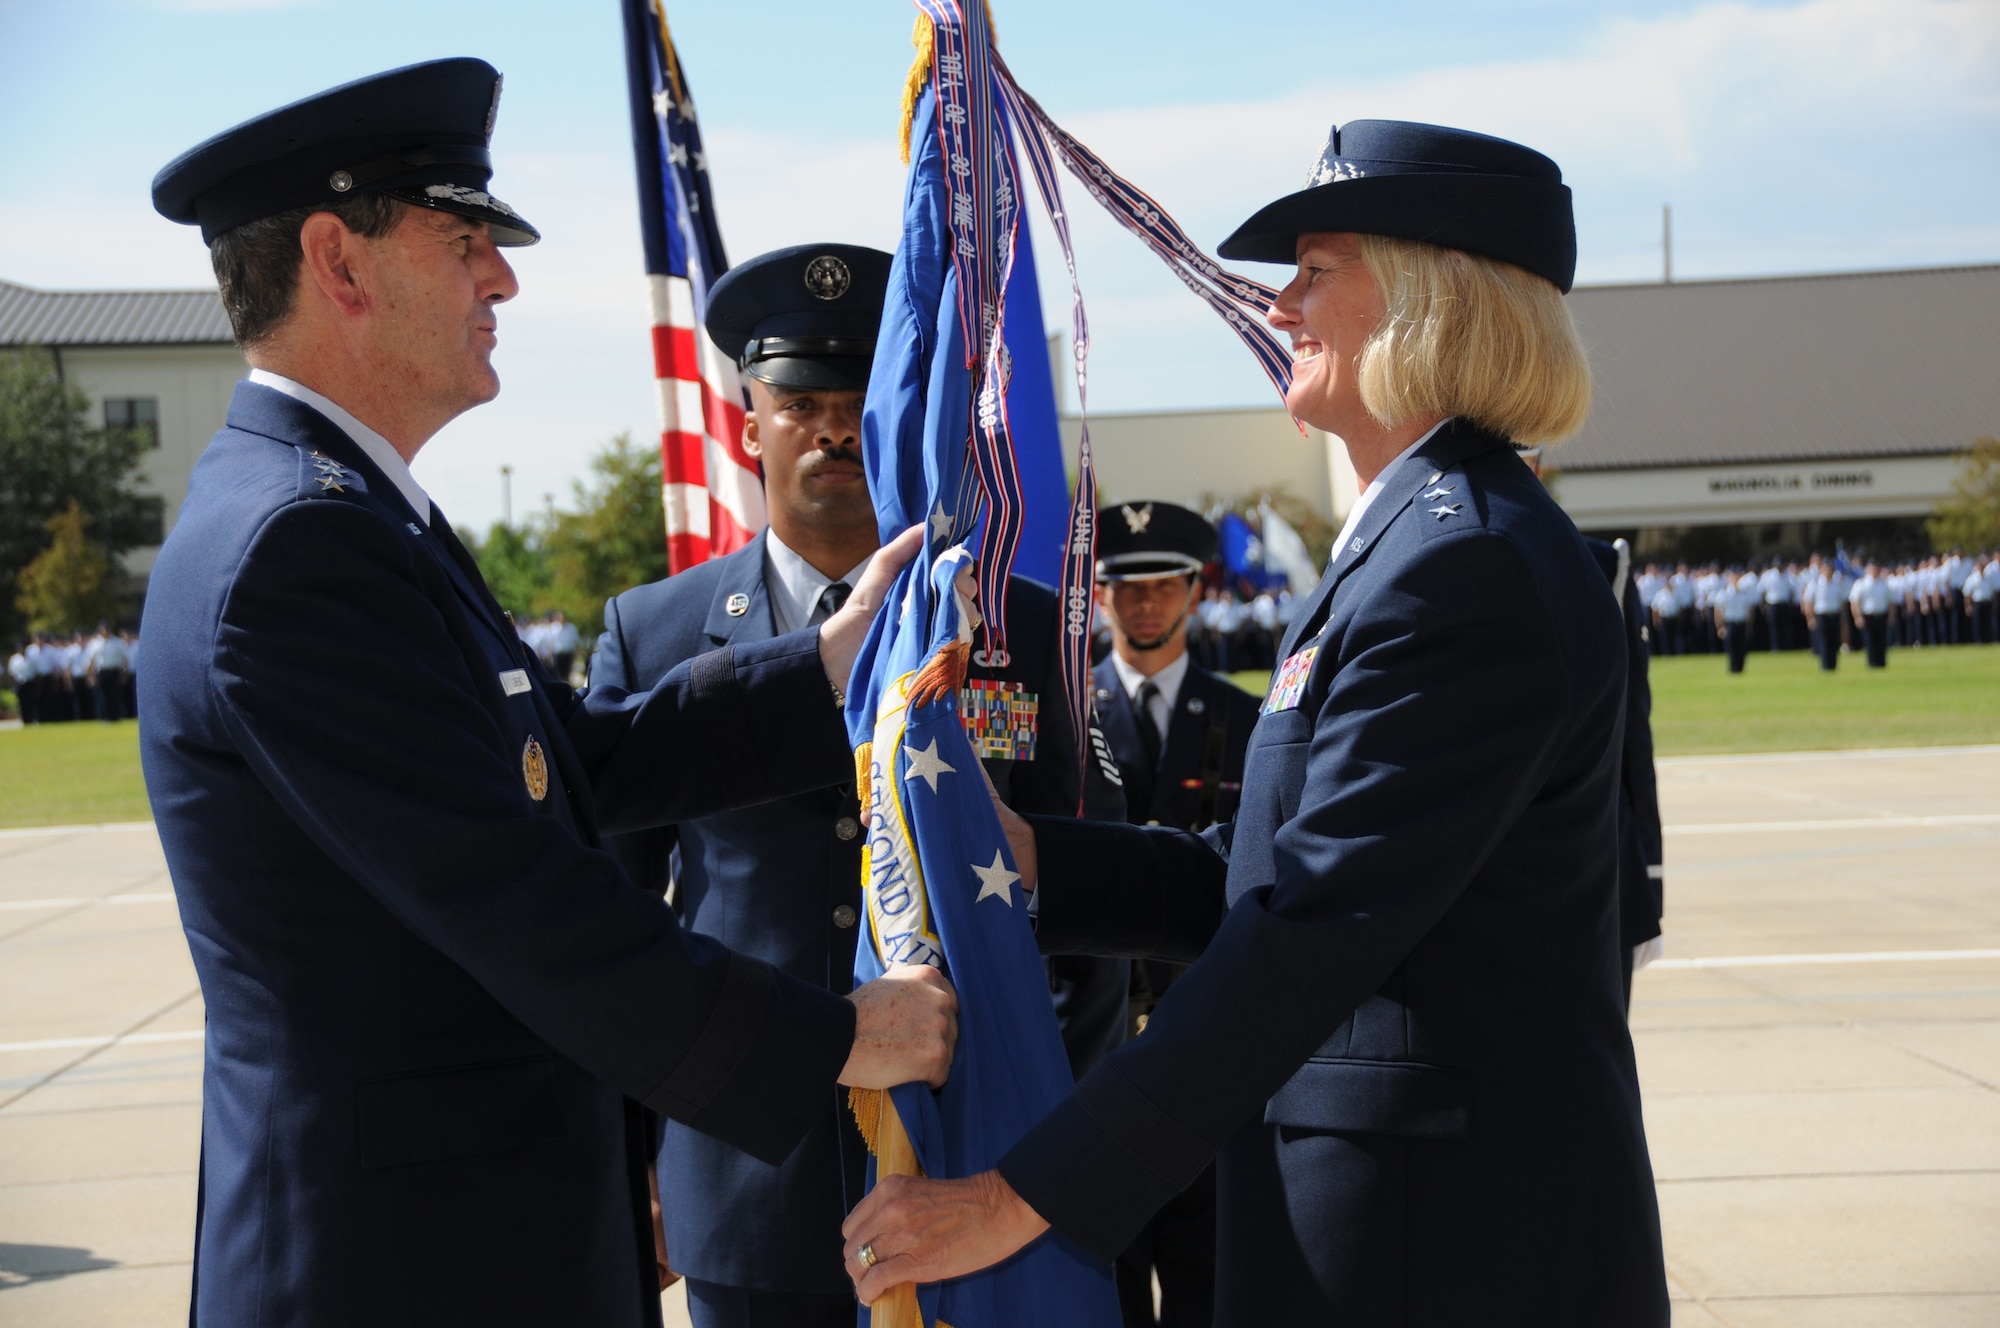 Gen. Stephen R. Lorenz, commander of Air Education and Training Command, hands the 2nd Air Force flag to Maj. Gen. Mary Kay Hertog during a change the 2nd Air Force change of command ceremony here Sept. 9. General Hertog took command of 2nd Air Force from Maj. Gen. Alfred Flowers at the Levitow Parade Field.  (U.S. Air Force photo by Kemberly Groue)